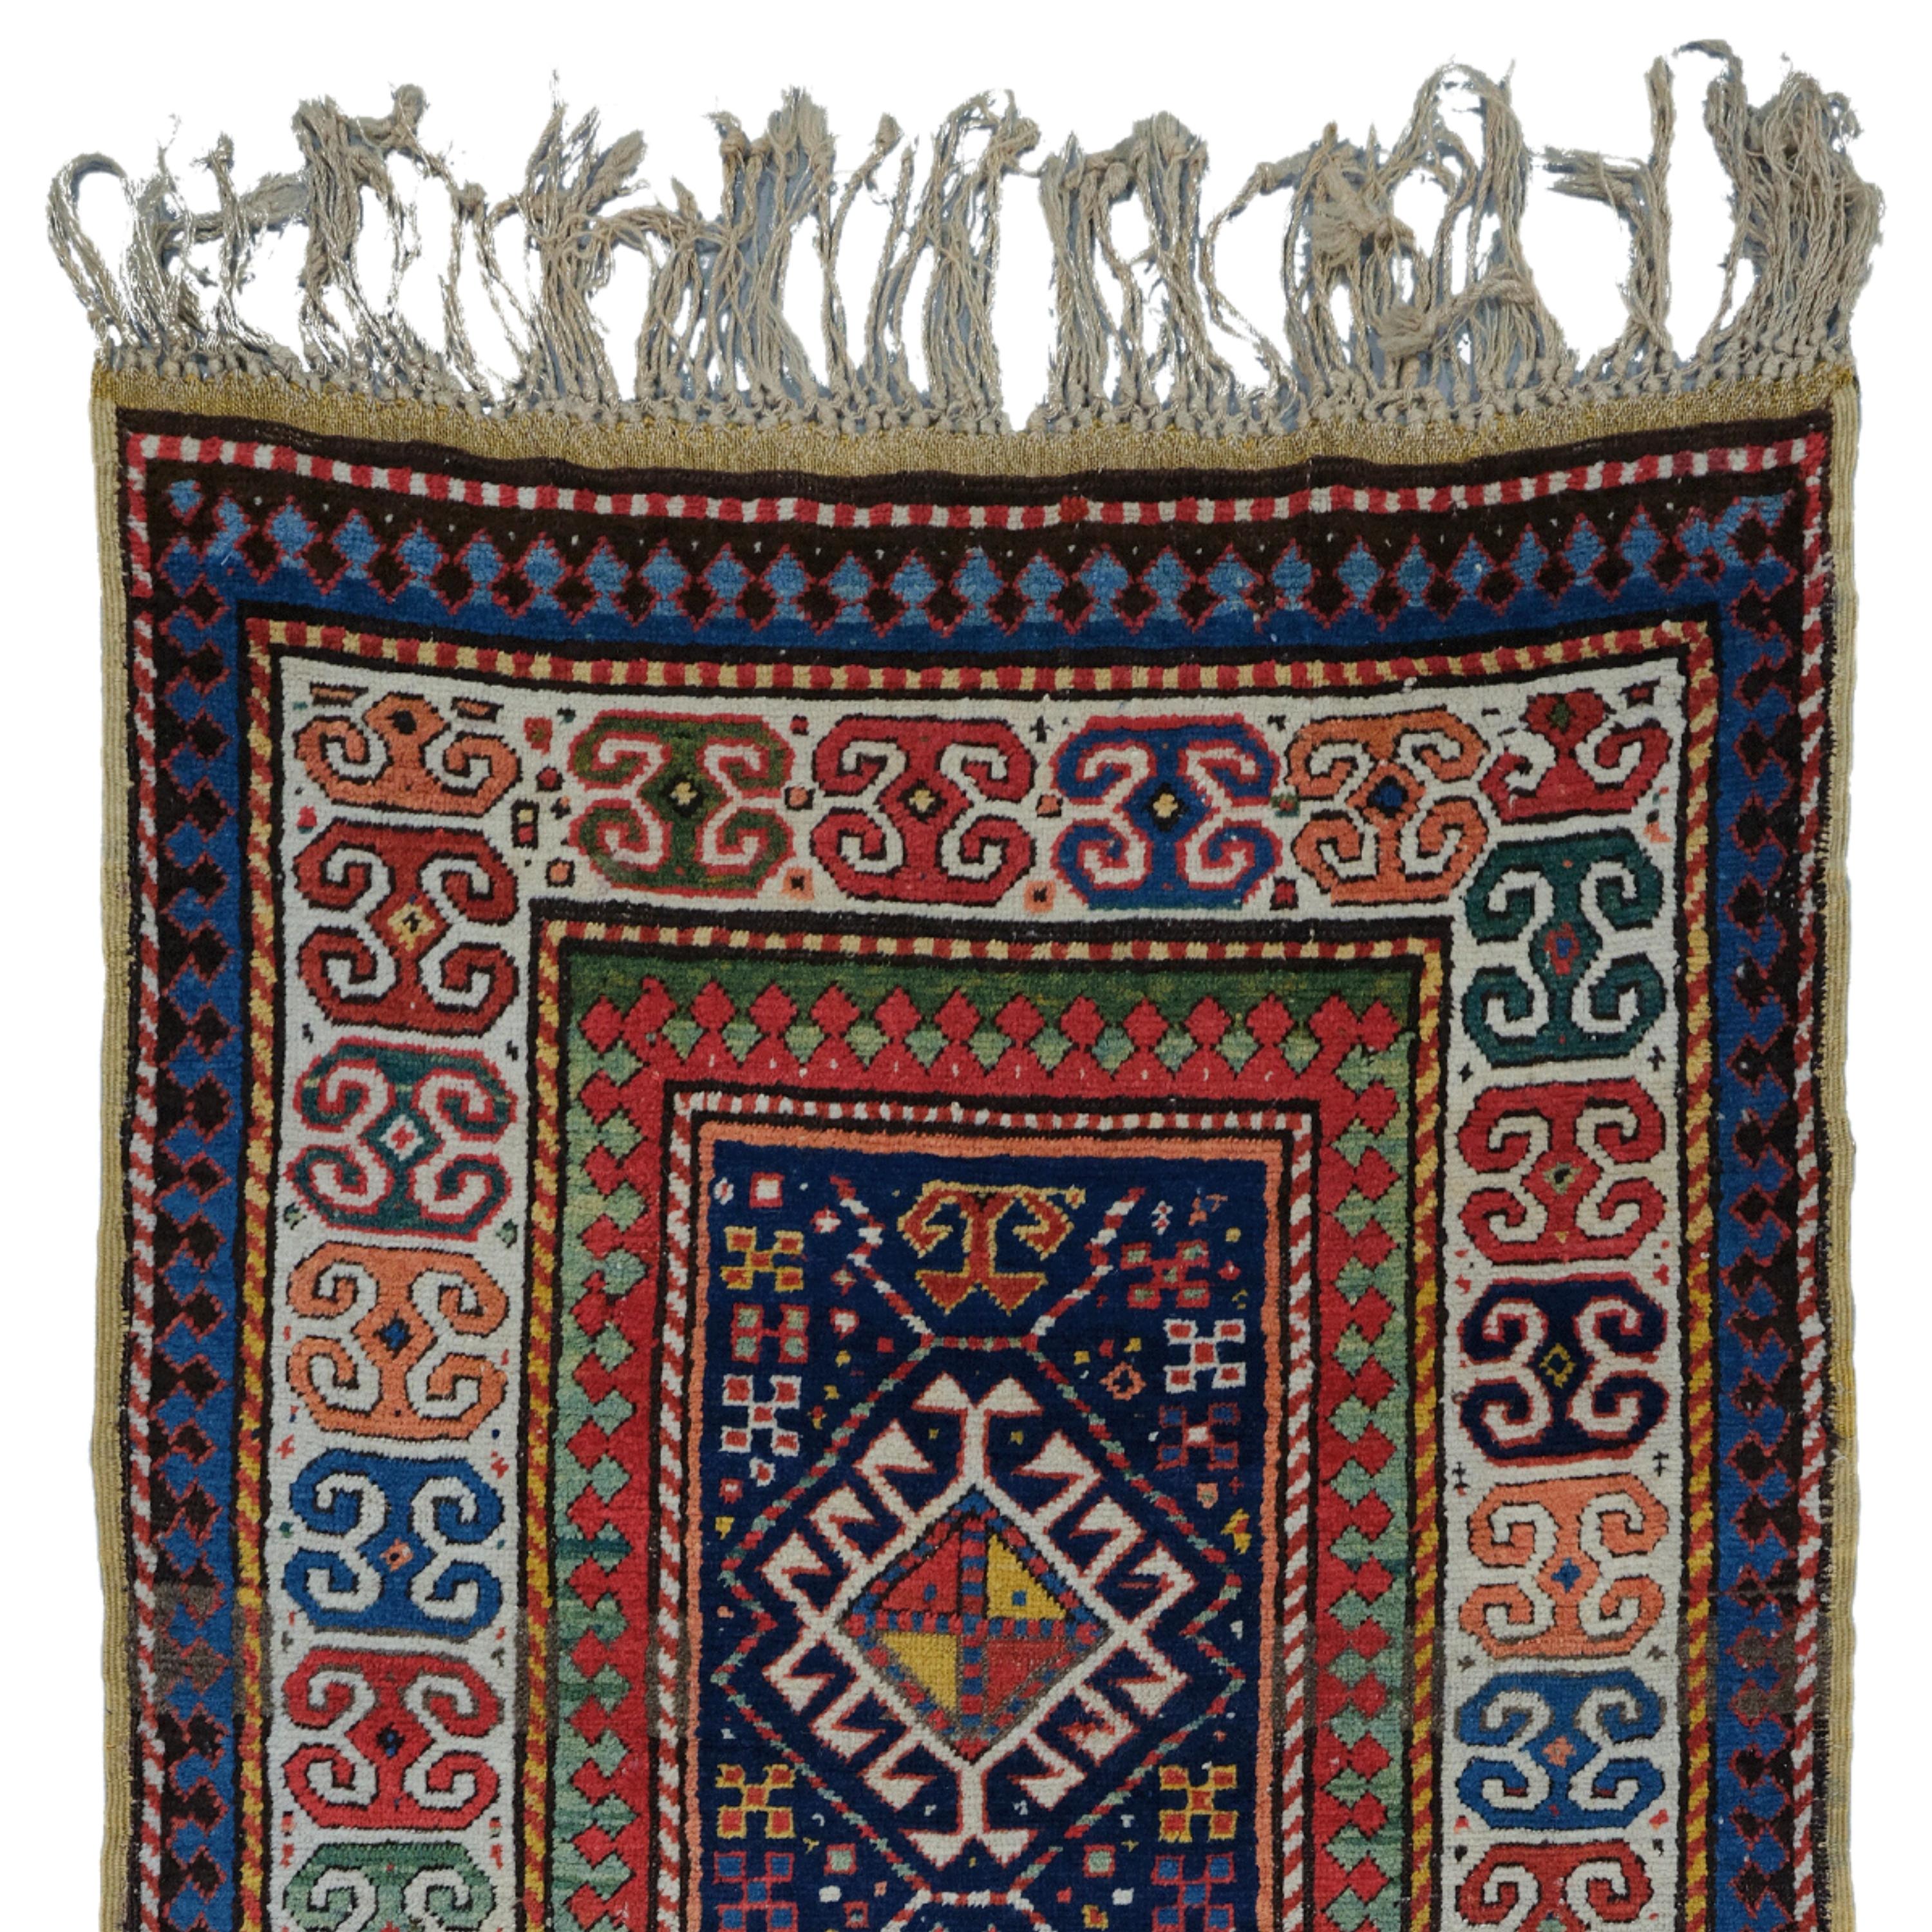 19th Century Caucasian Gendje Runner

This elegant antique silk Kayseri carpet brings the elegance and craftsmanship of the 19th century to the present day. This work, which draws attention with its rich color palette and detailed patterns, adds